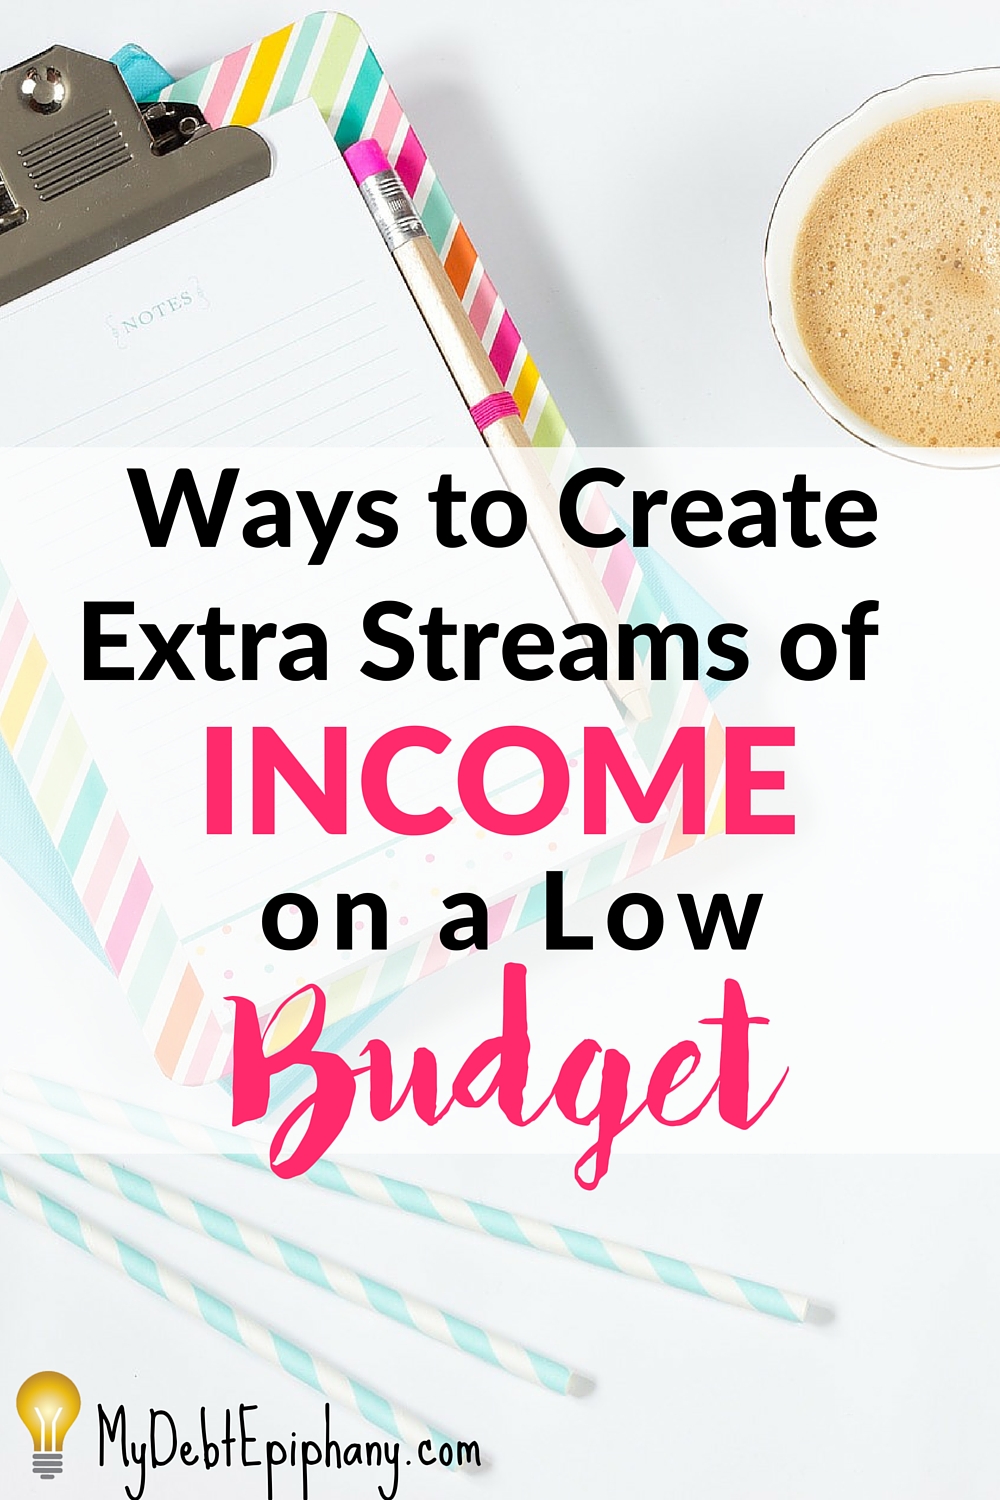 ways-to-create-extra-streams-of-income-on-a-low-budget